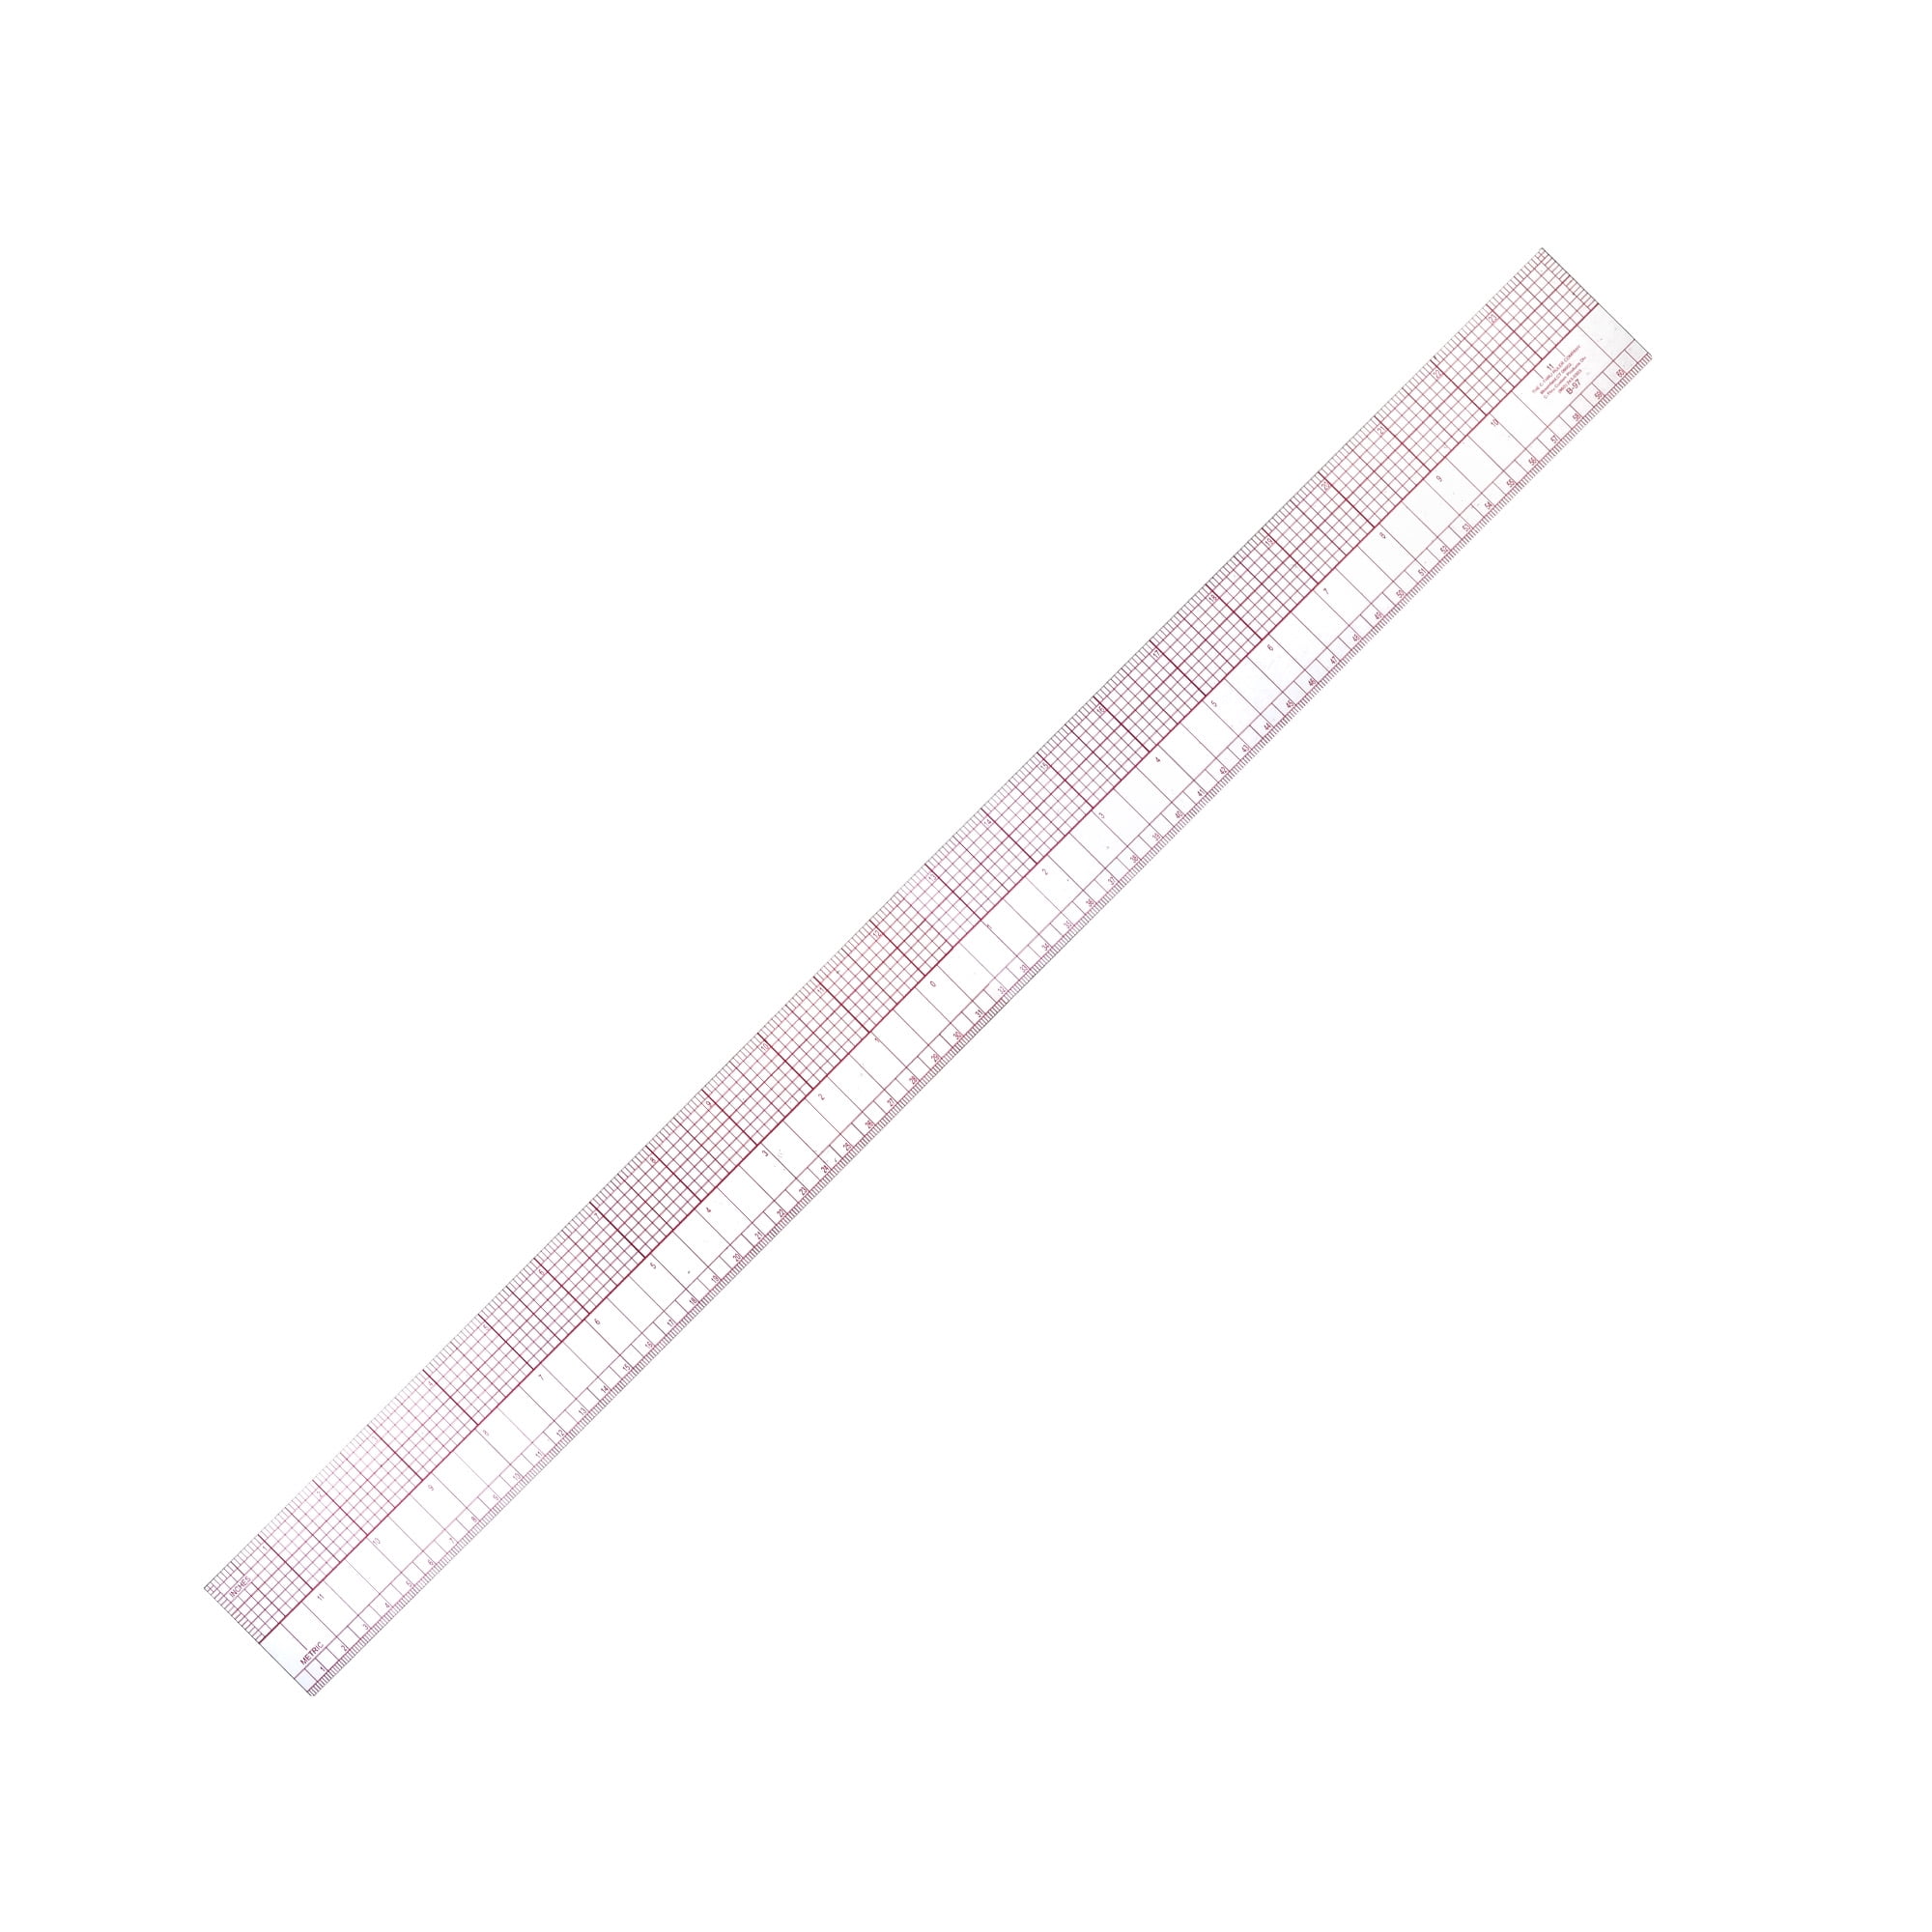 Uxcell Beveled Ruler 60cm /23 inch Plastic Transparent B97 Sewing Tool, Red